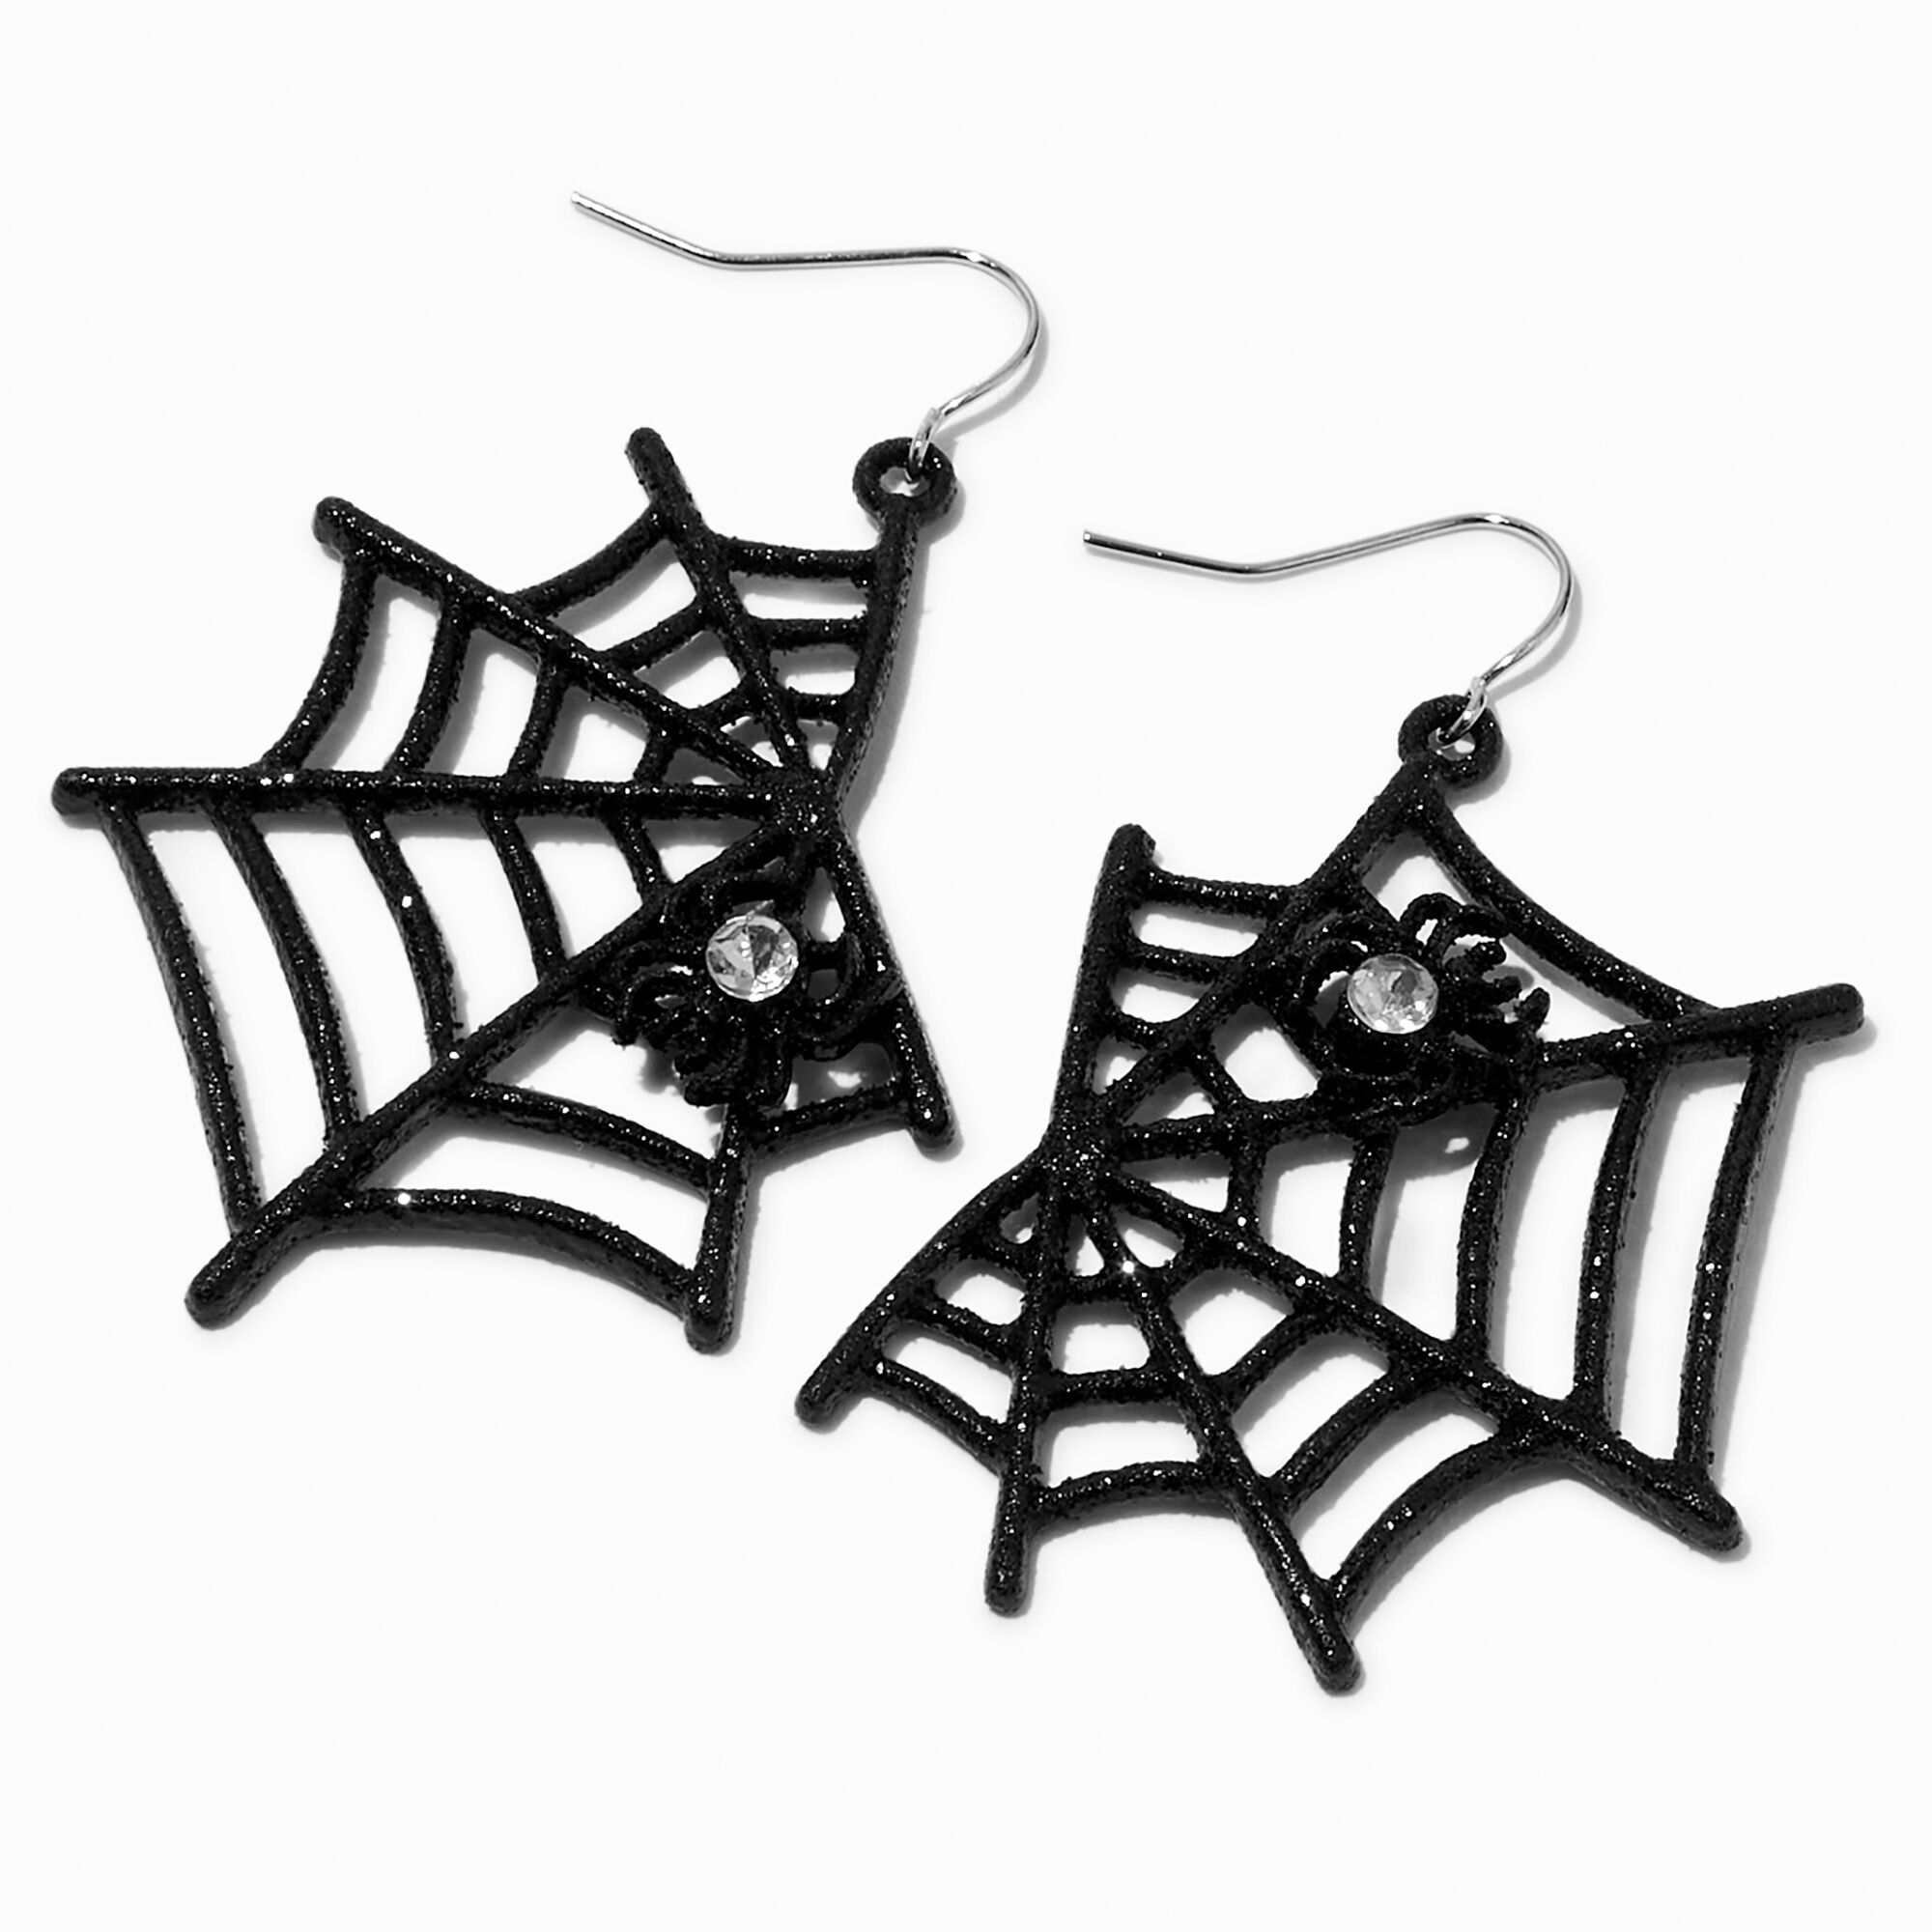 View Claires Rhinestone Spider Web 2 Drop Earrings Black information